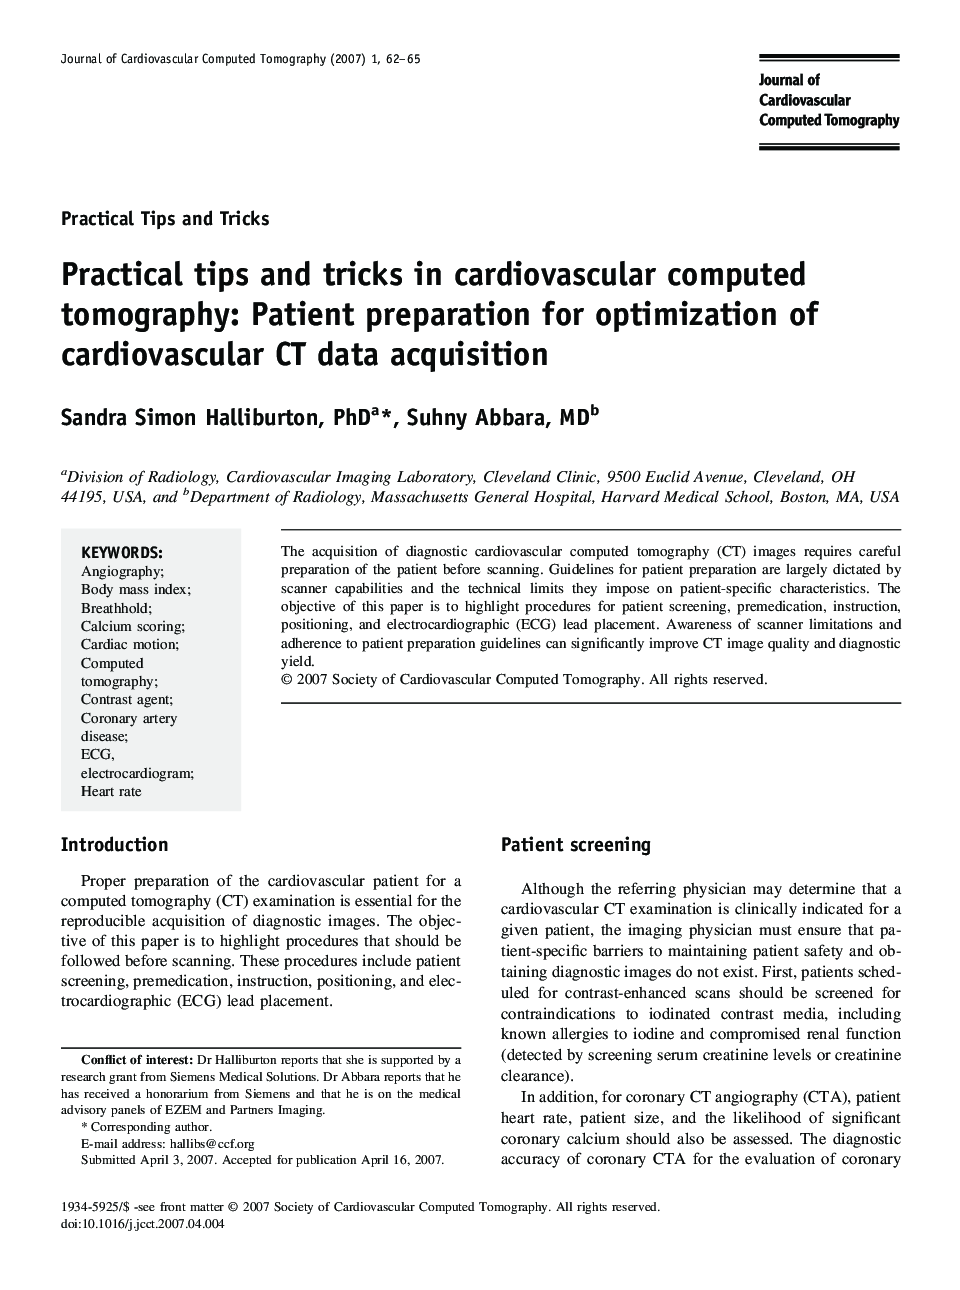 Practical tips and tricks in cardiovascular computed tomography: Patient preparation for optimization of cardiovascular CT data acquisition 